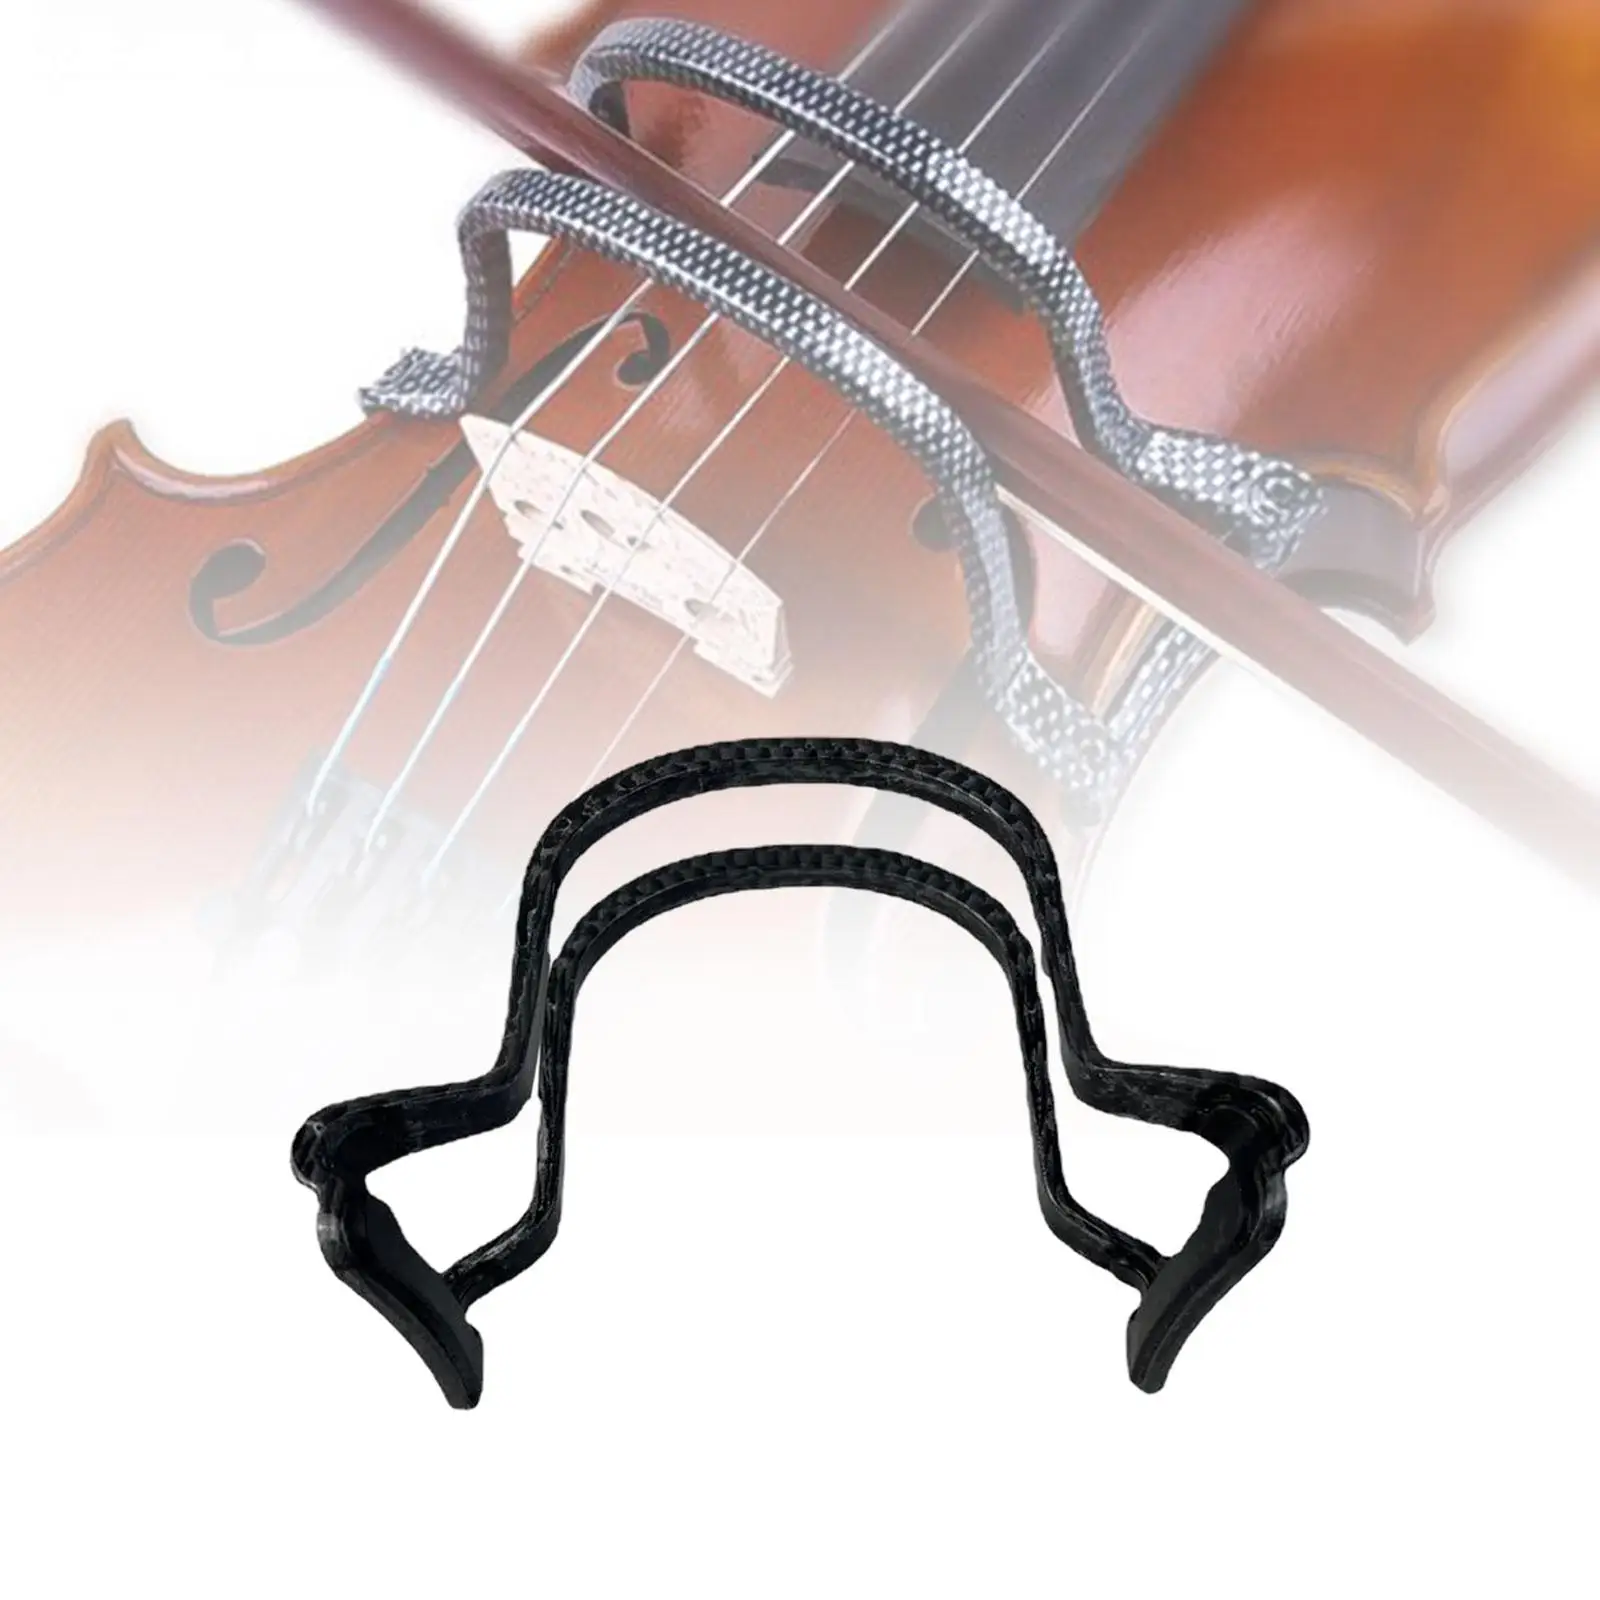 Portable Violin Bow Straighten Guide Tool Universal Training for 4/4 3/4 1/2 Violin Beginner Kids and Adults Musical Instrument